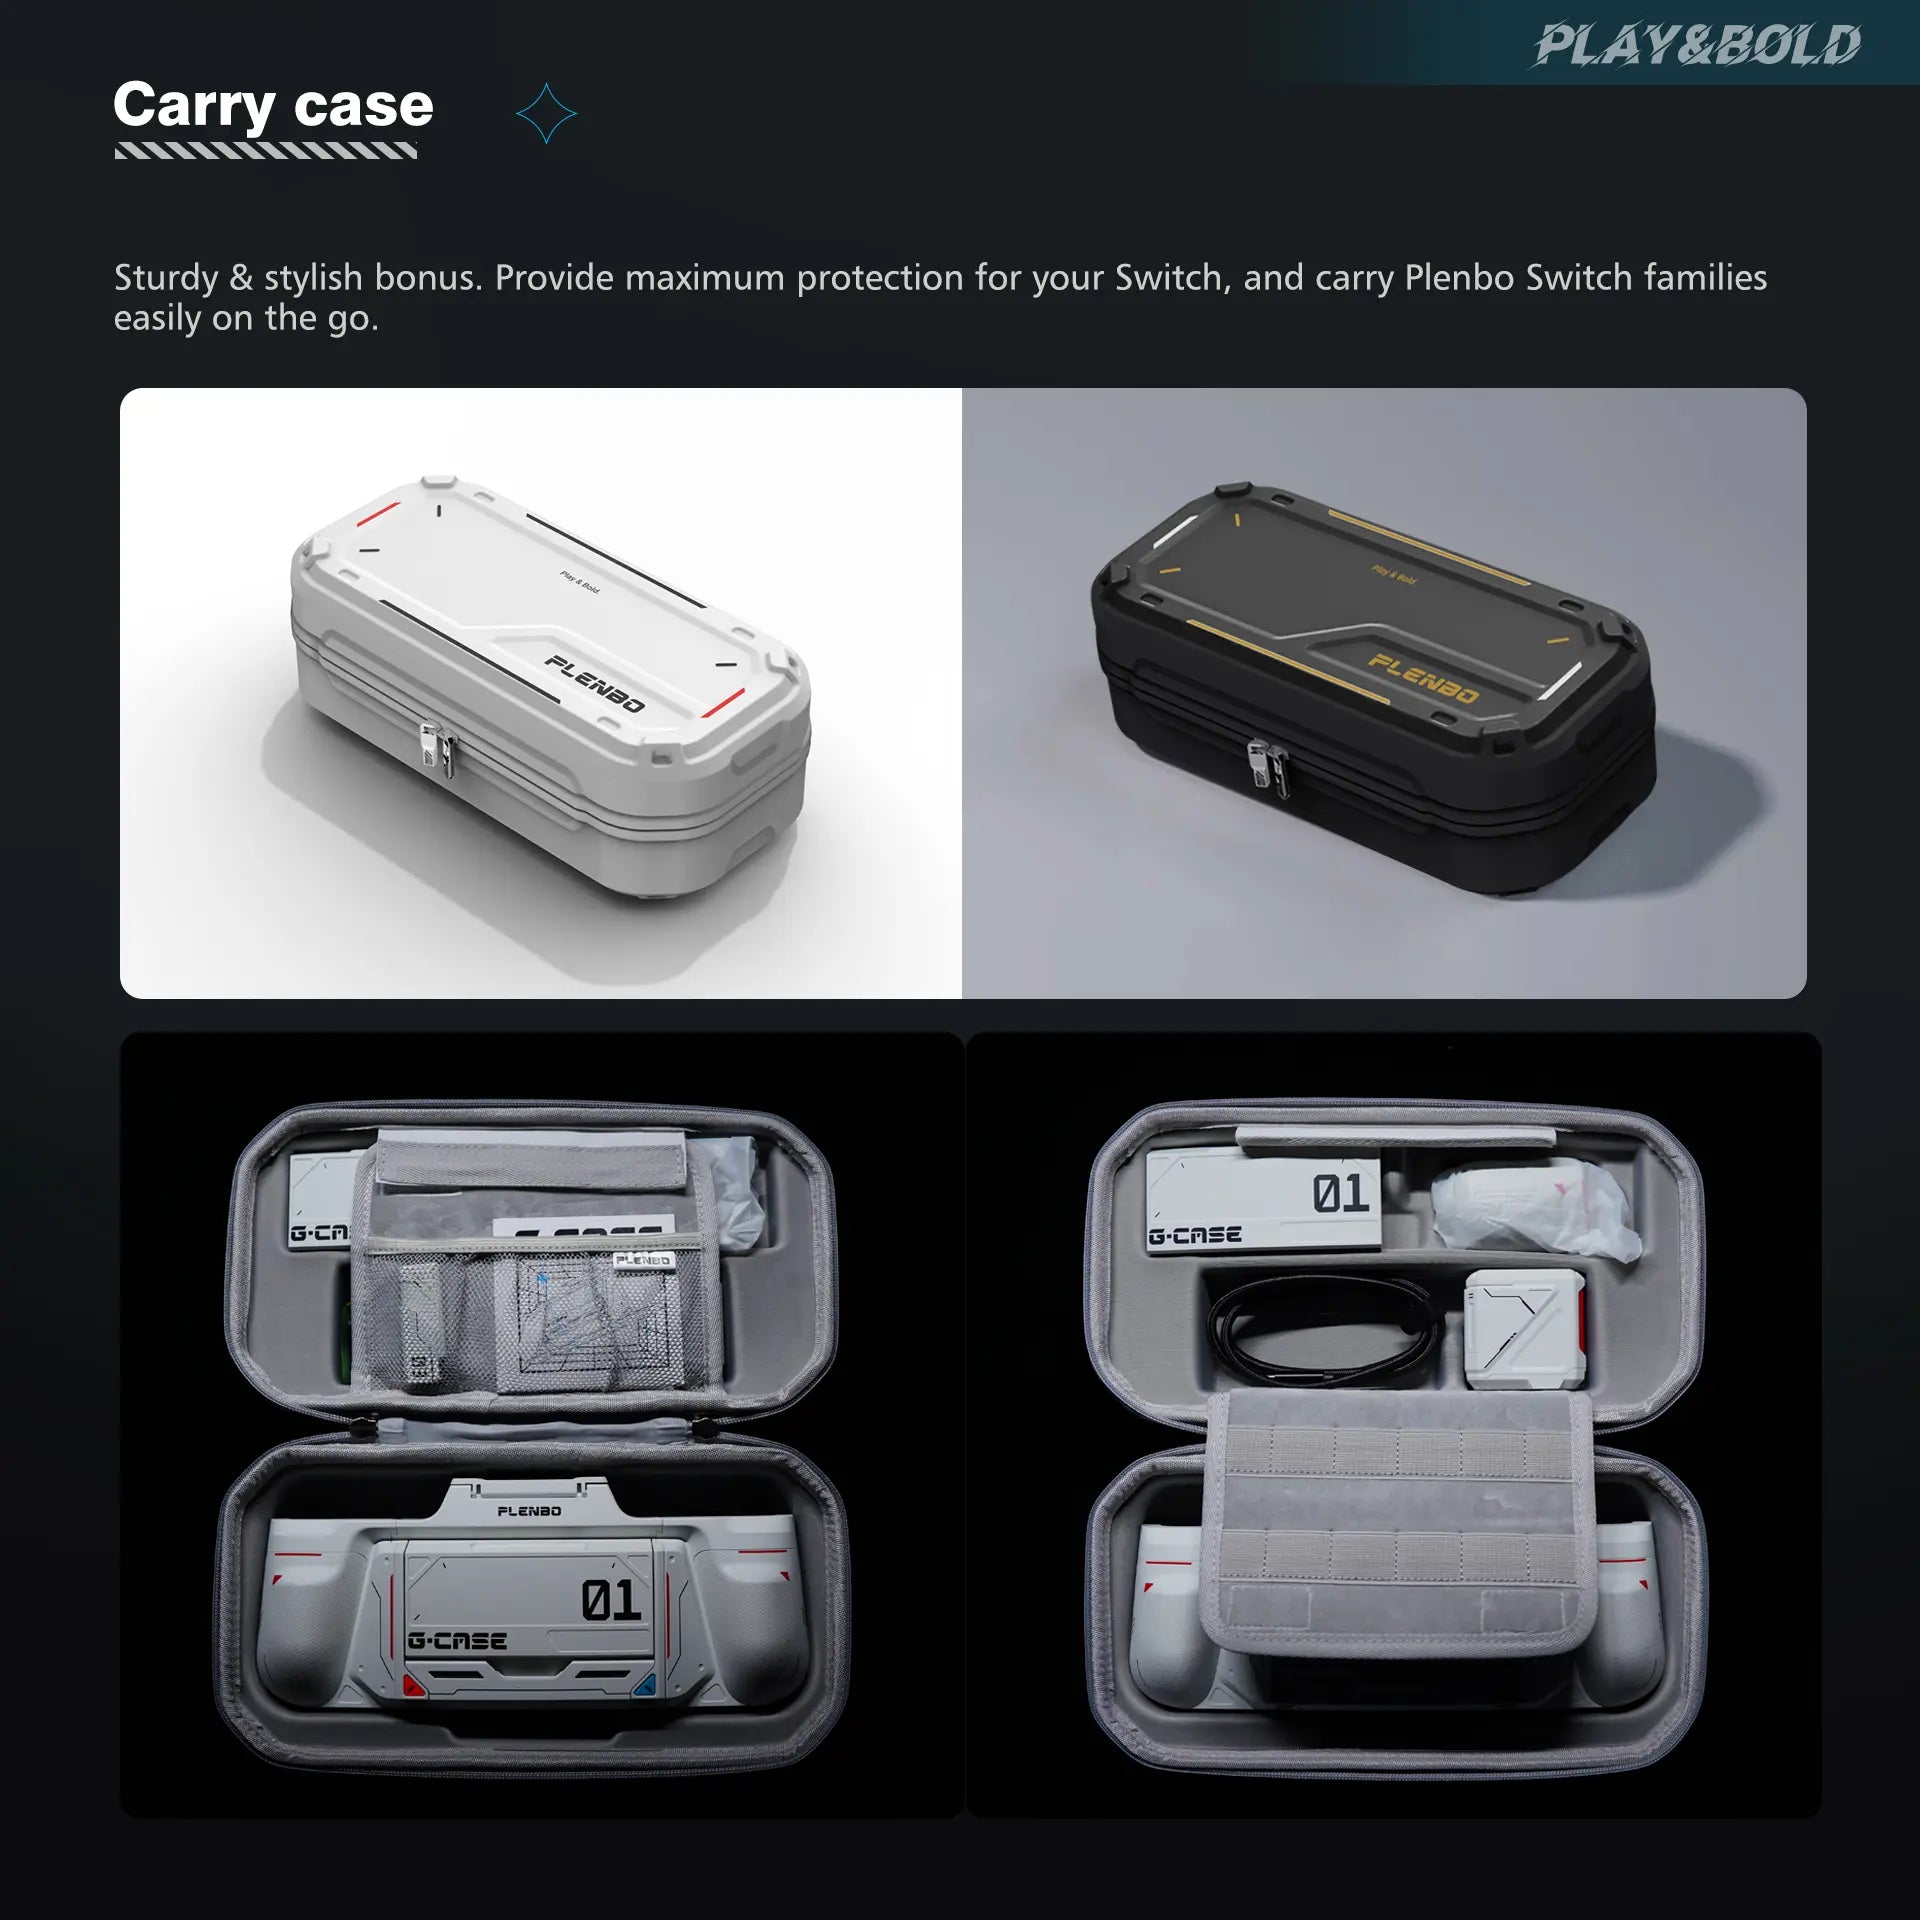 internal layout of carrying case